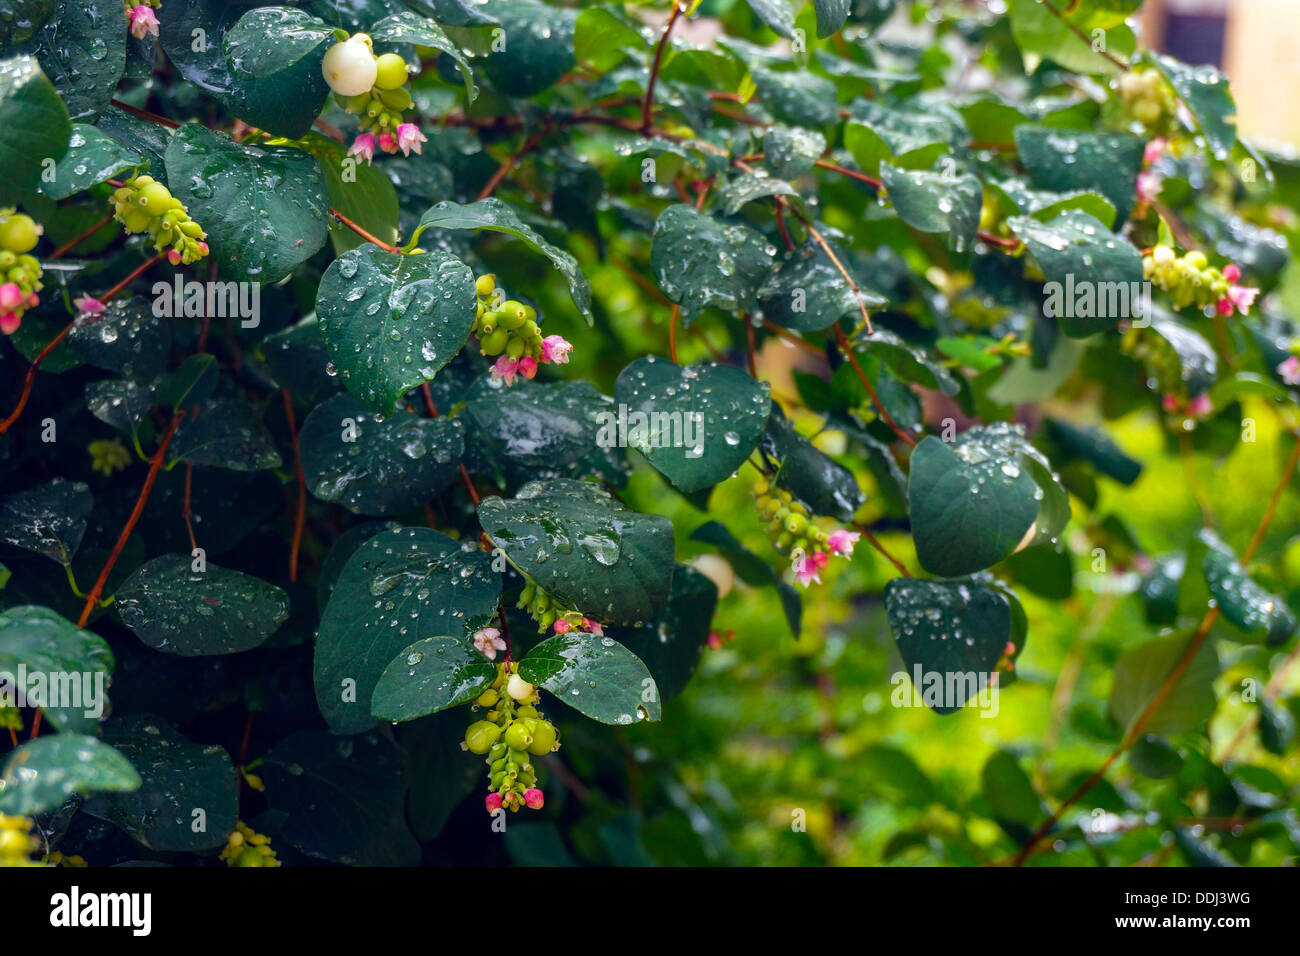 Raindrops on green leaves with pink flowers Stock Photo